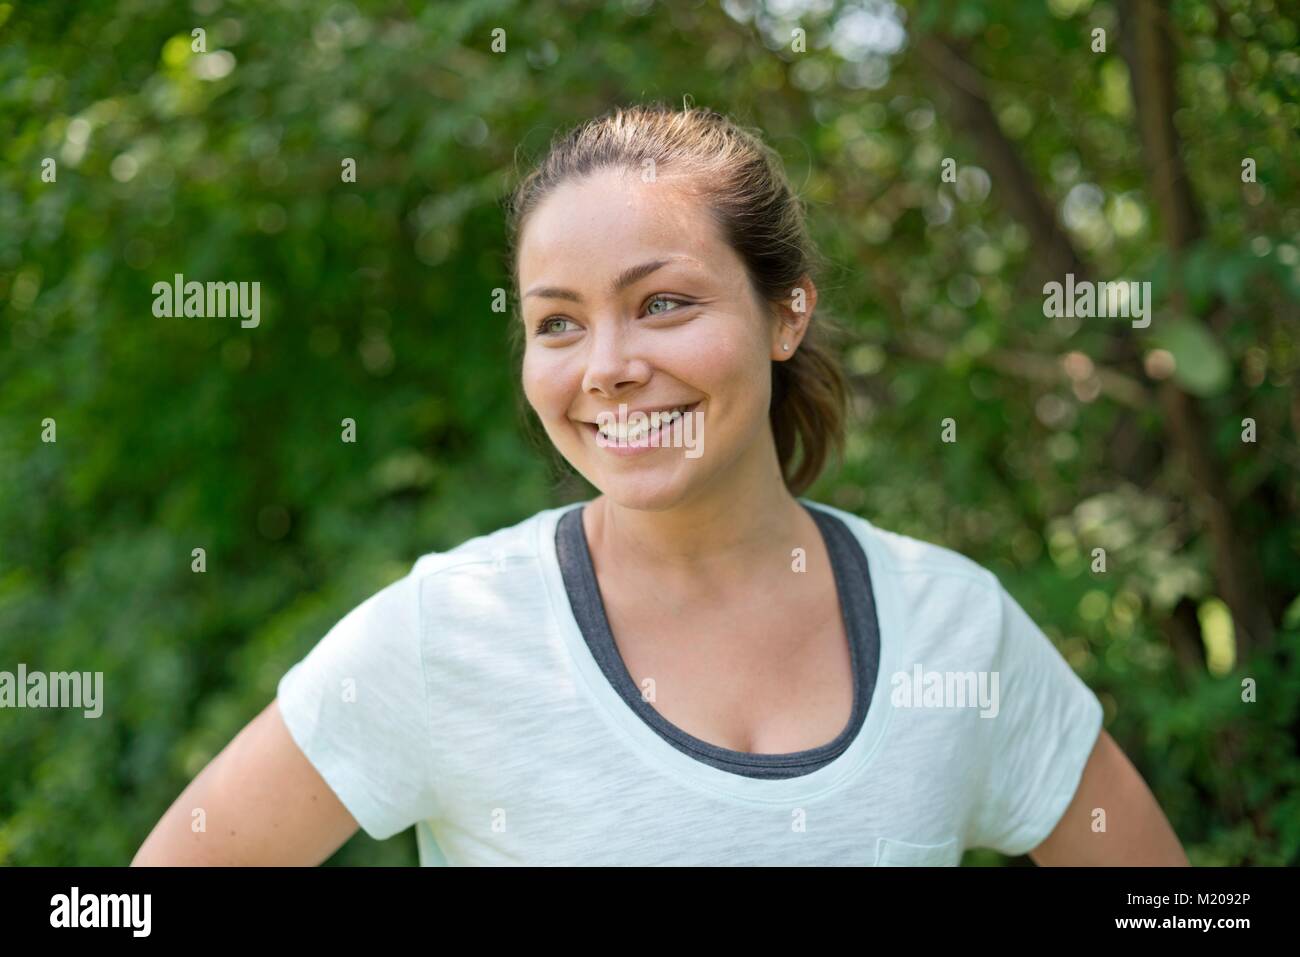 Young woman smiling and looking away. Stock Photo